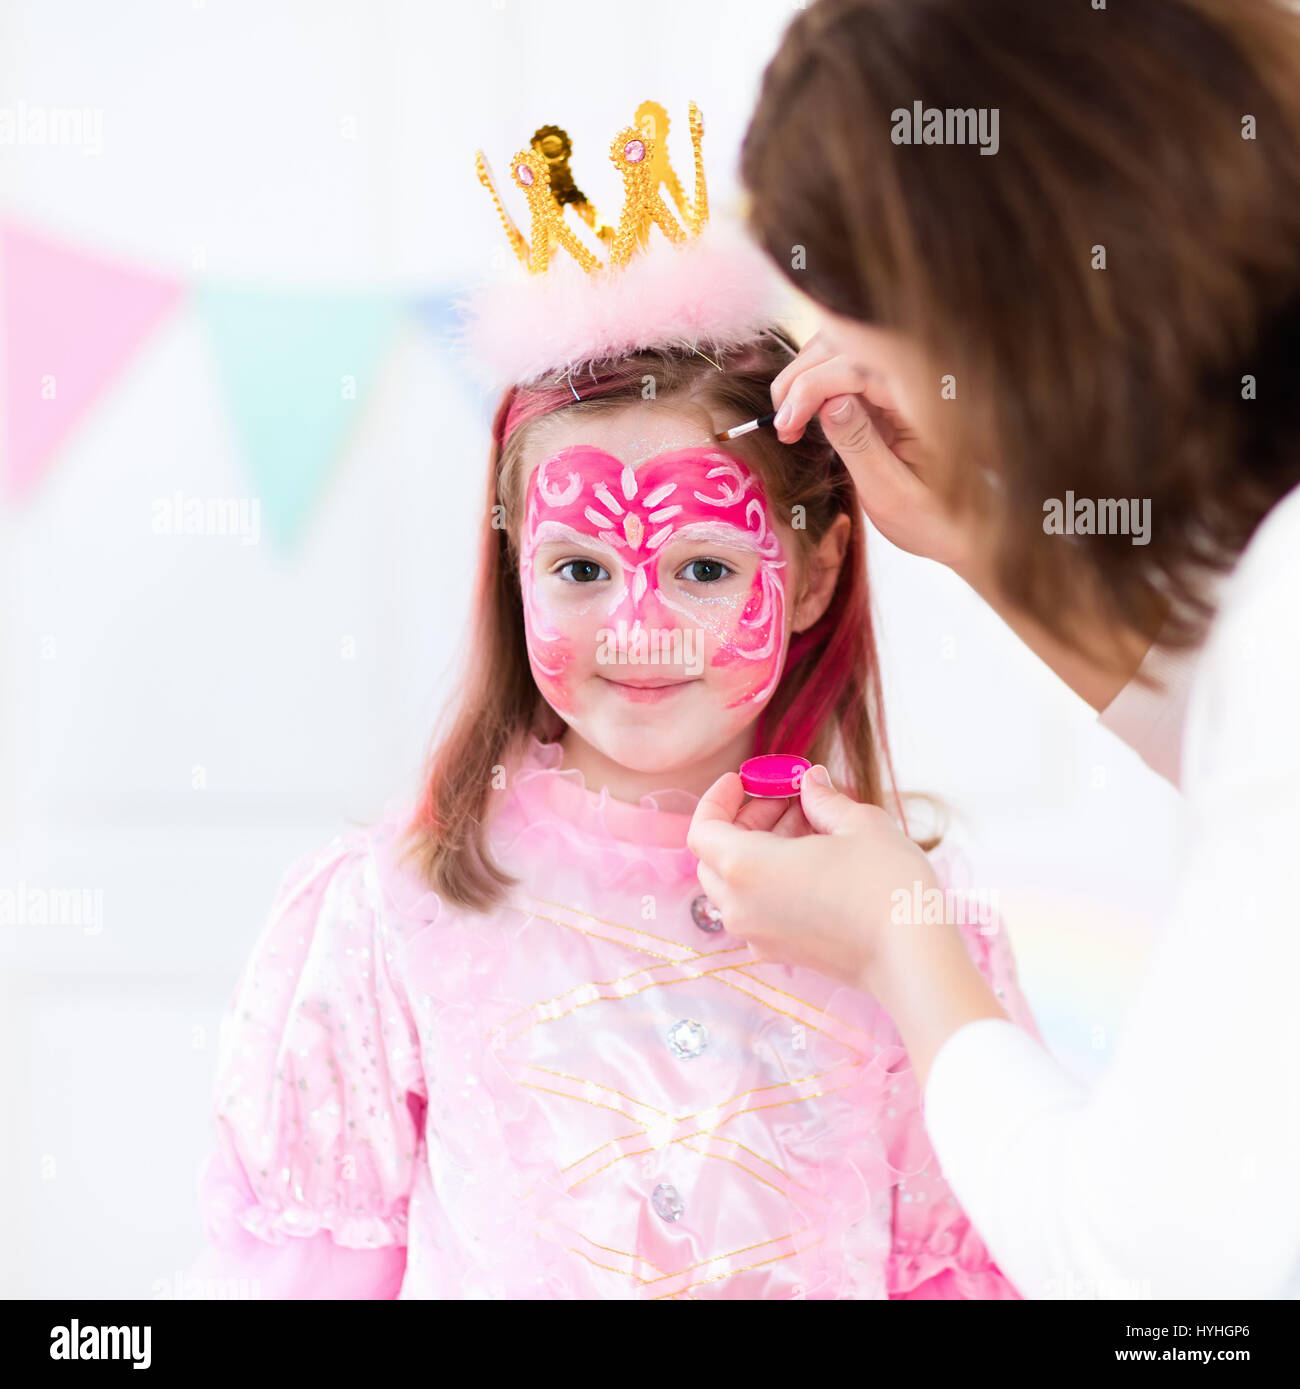 Child Carnival Costume Scary Face Painting Stock Photo 1526647835